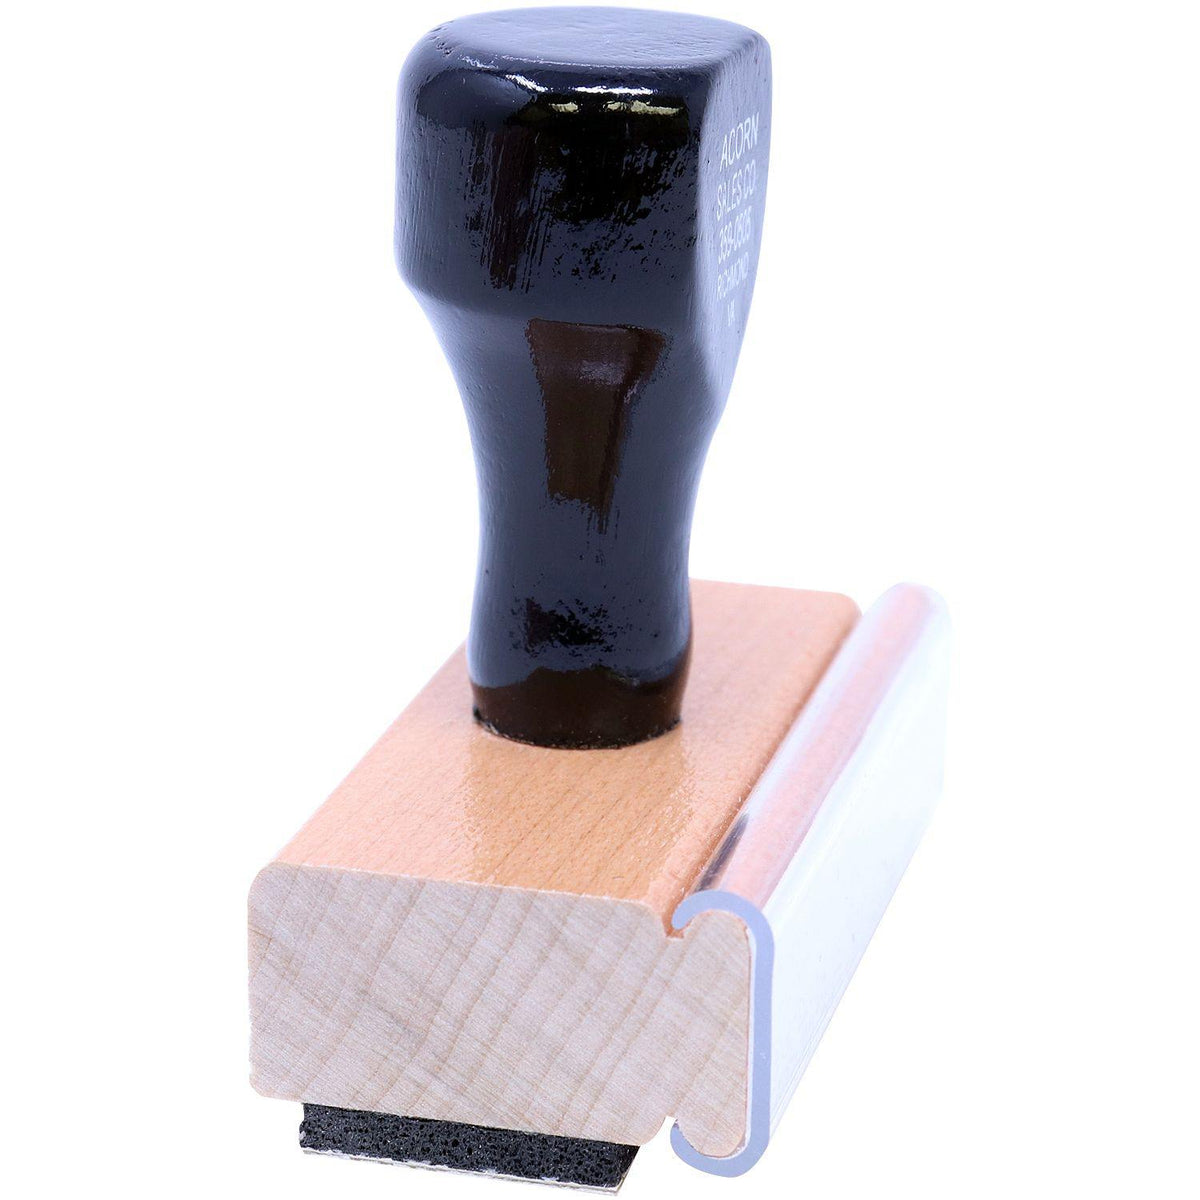 Side View of Court Copy Rubber Stamp at an Angle